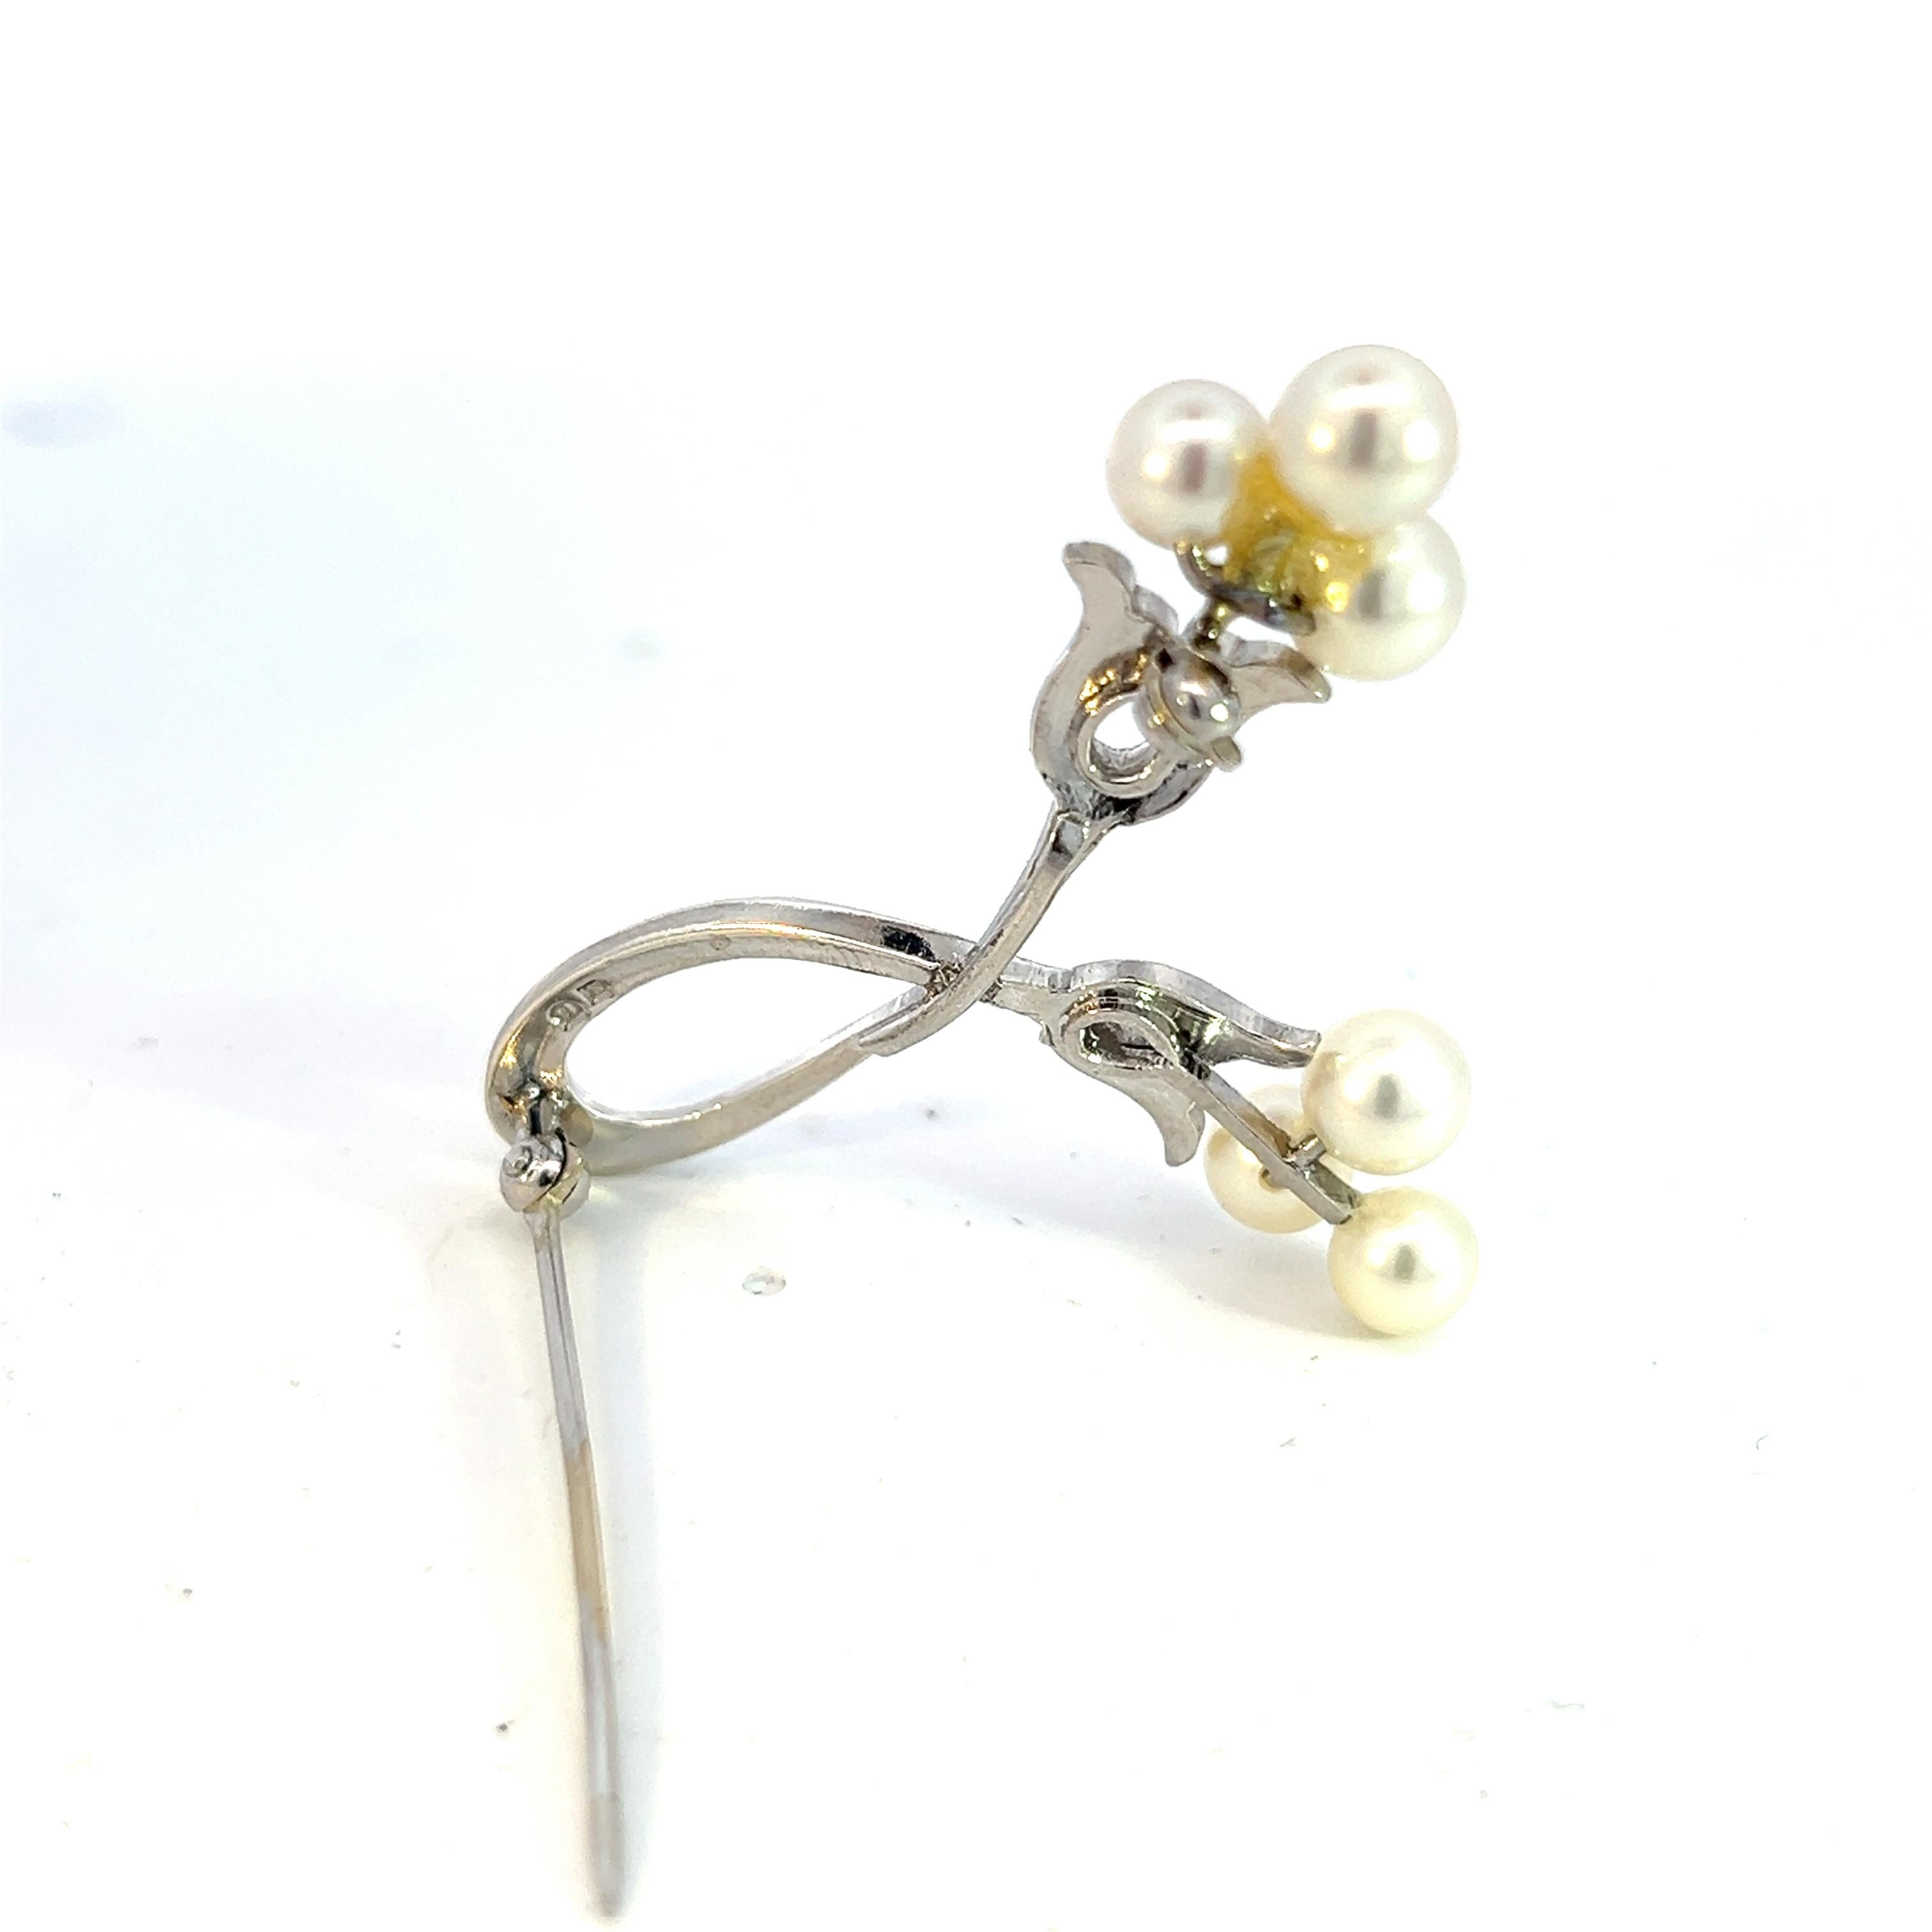 Mikimoto Estate Akoya Pearl Brooch Pin 5.60 mm 4.6 Grams M351

This elegant Authentic Mikimoto Estate sterling silver brooch has 6 Saltwater Akoya Cultured Pearls ranging in size from 5.60 mm with a weight of 4.6 Grams.

TRUSTED SELLER SINCE